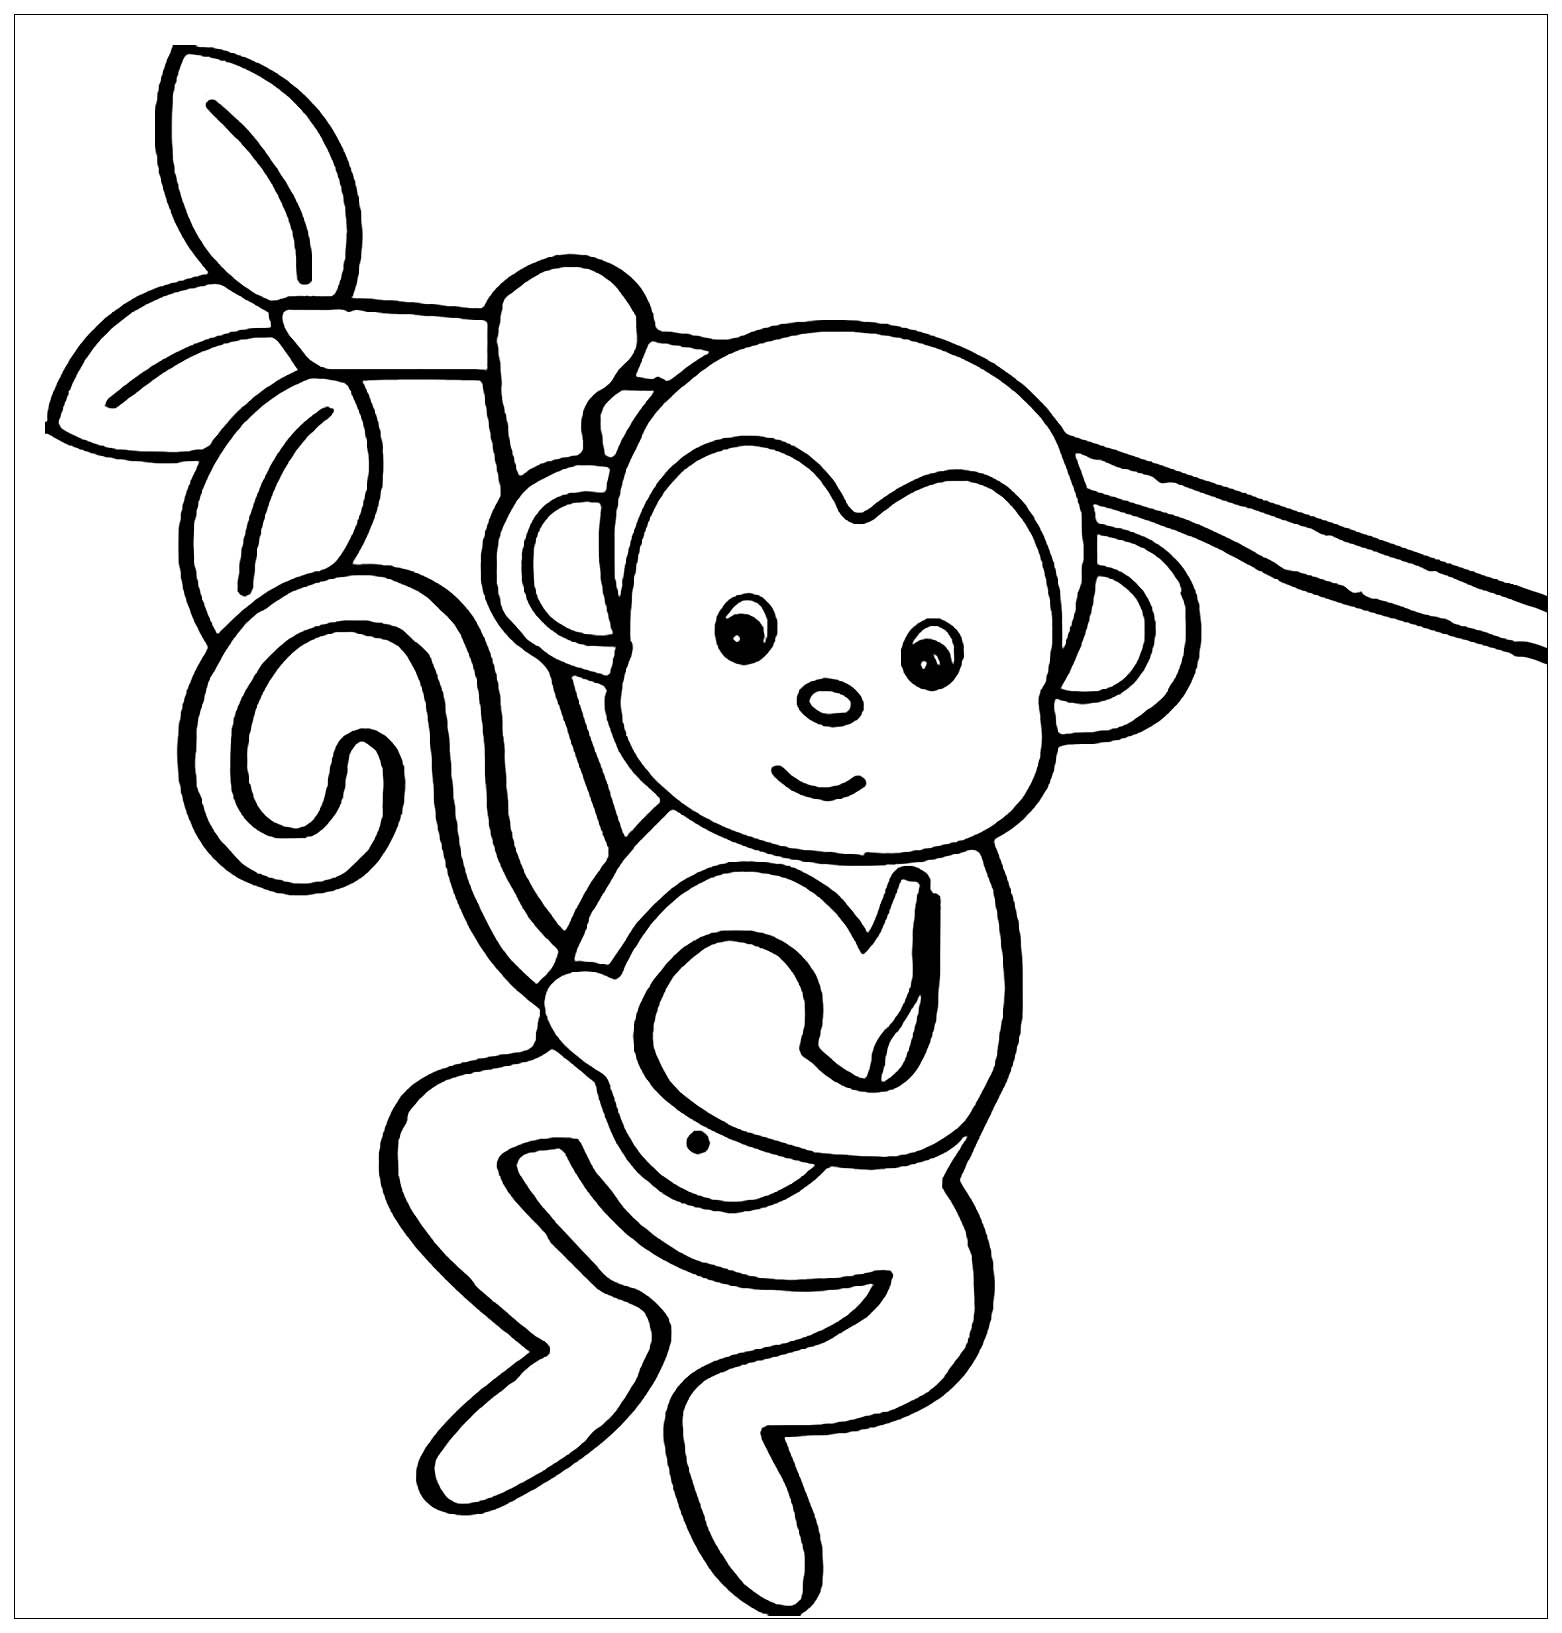 Monkeys to color for children - Monkeys Kids Coloring Pages